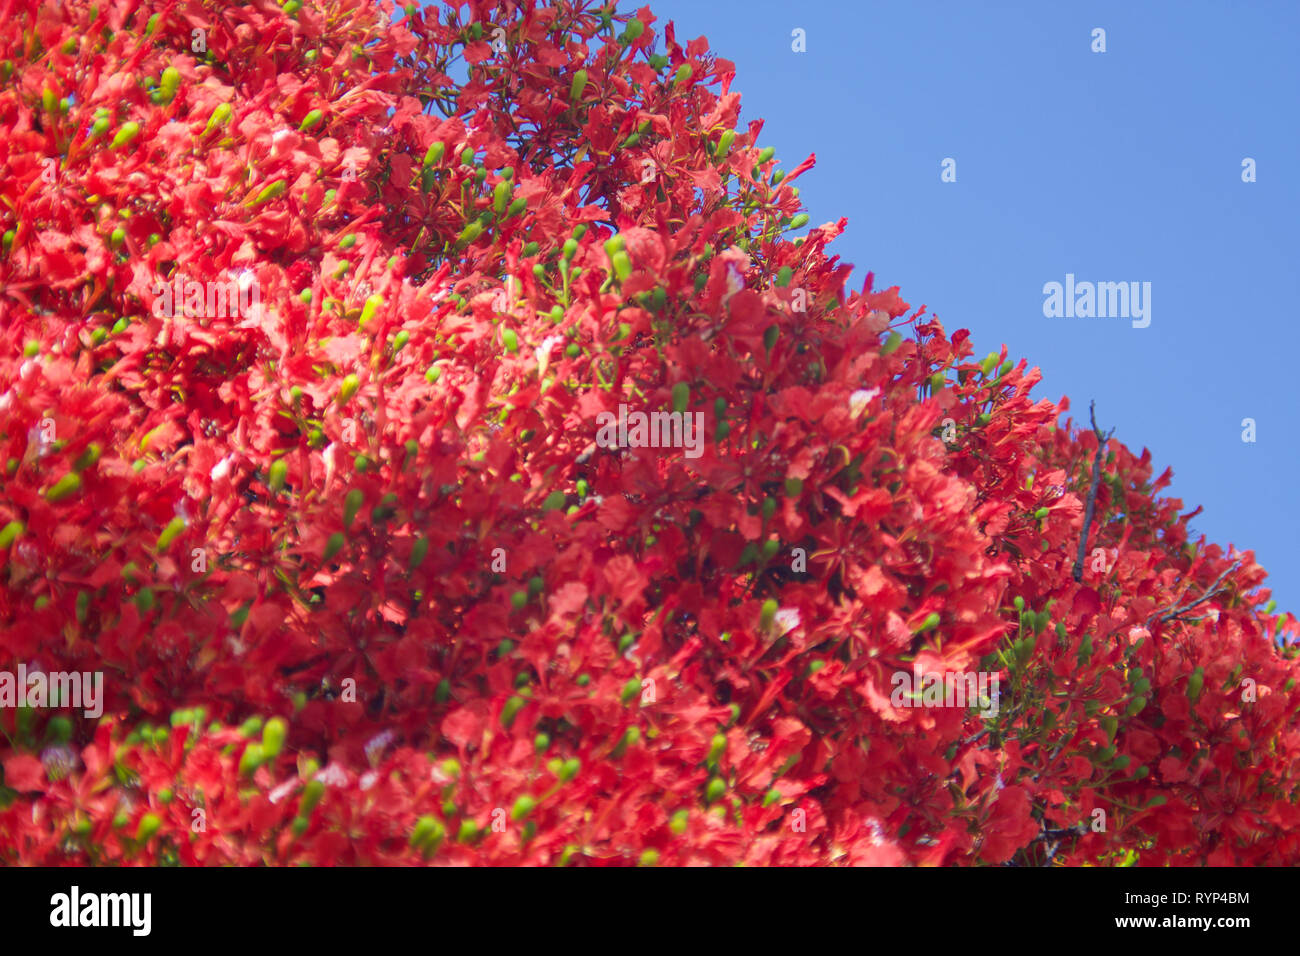 Tree with red and green flowers featuring a blue sky, that bloom in the spring season in Mexico. Stock Photo